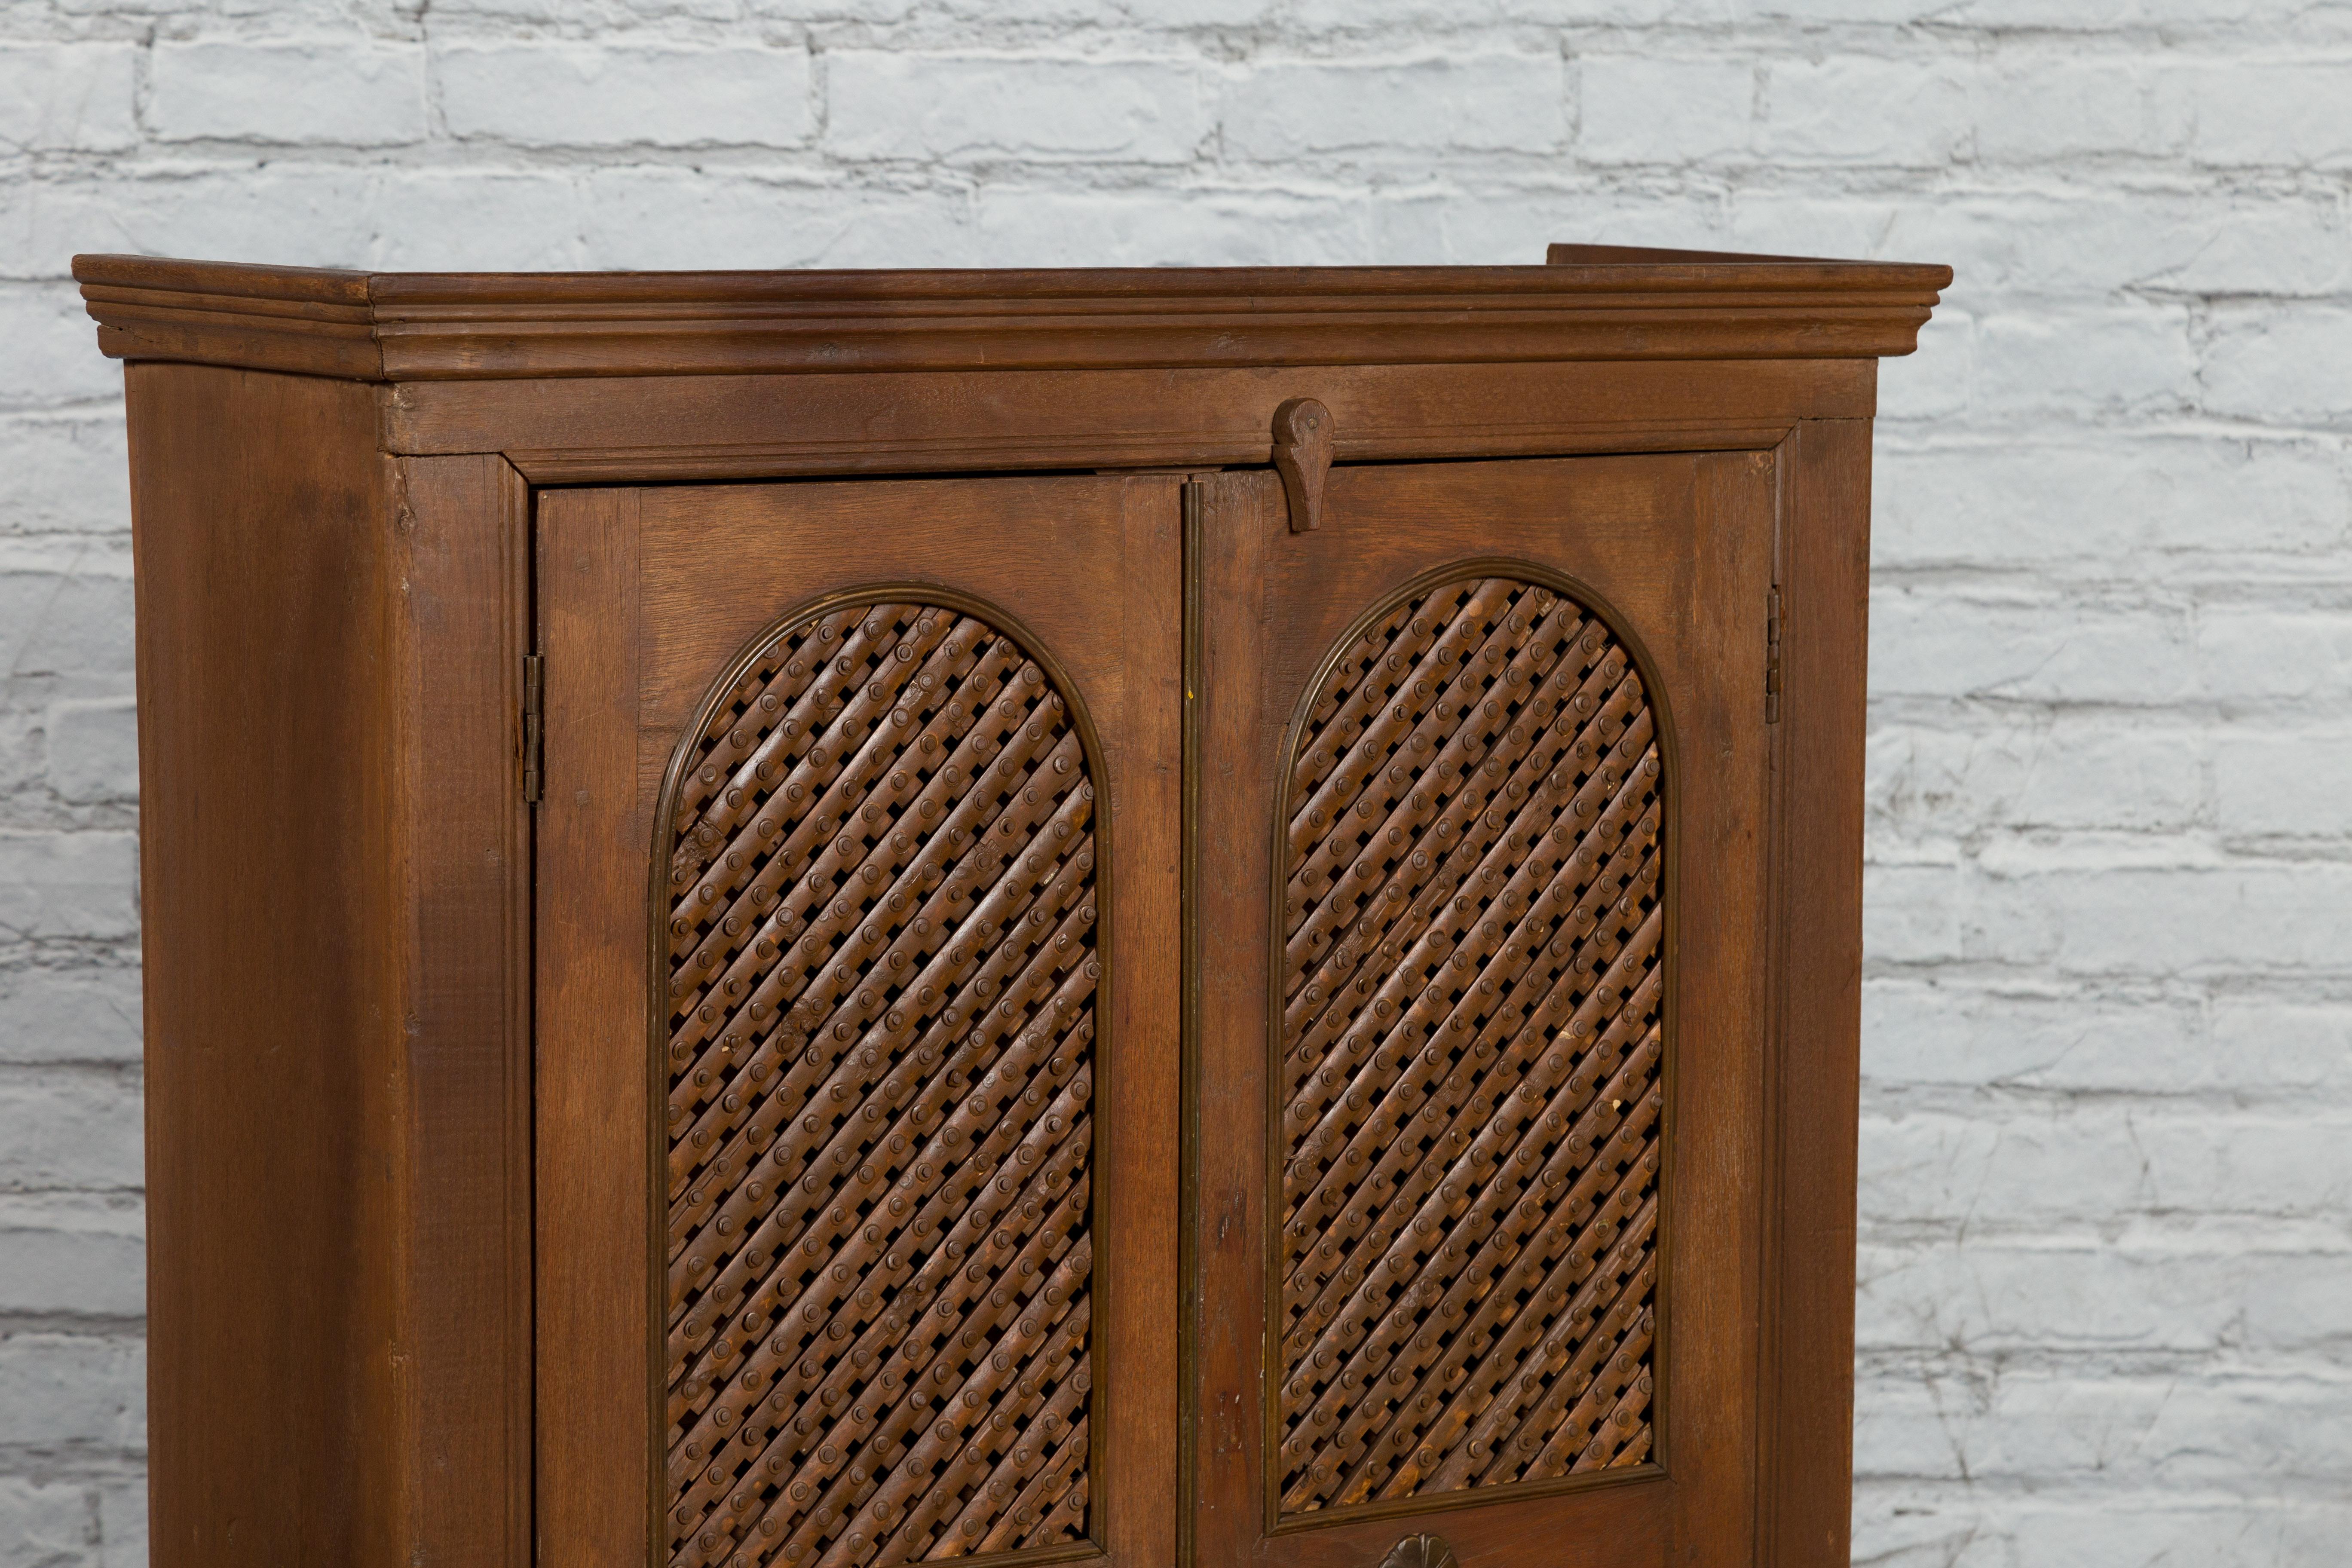 Indian Vintage Wooden Cabinet with Lattice Motifs and Carved Panels For Sale 6